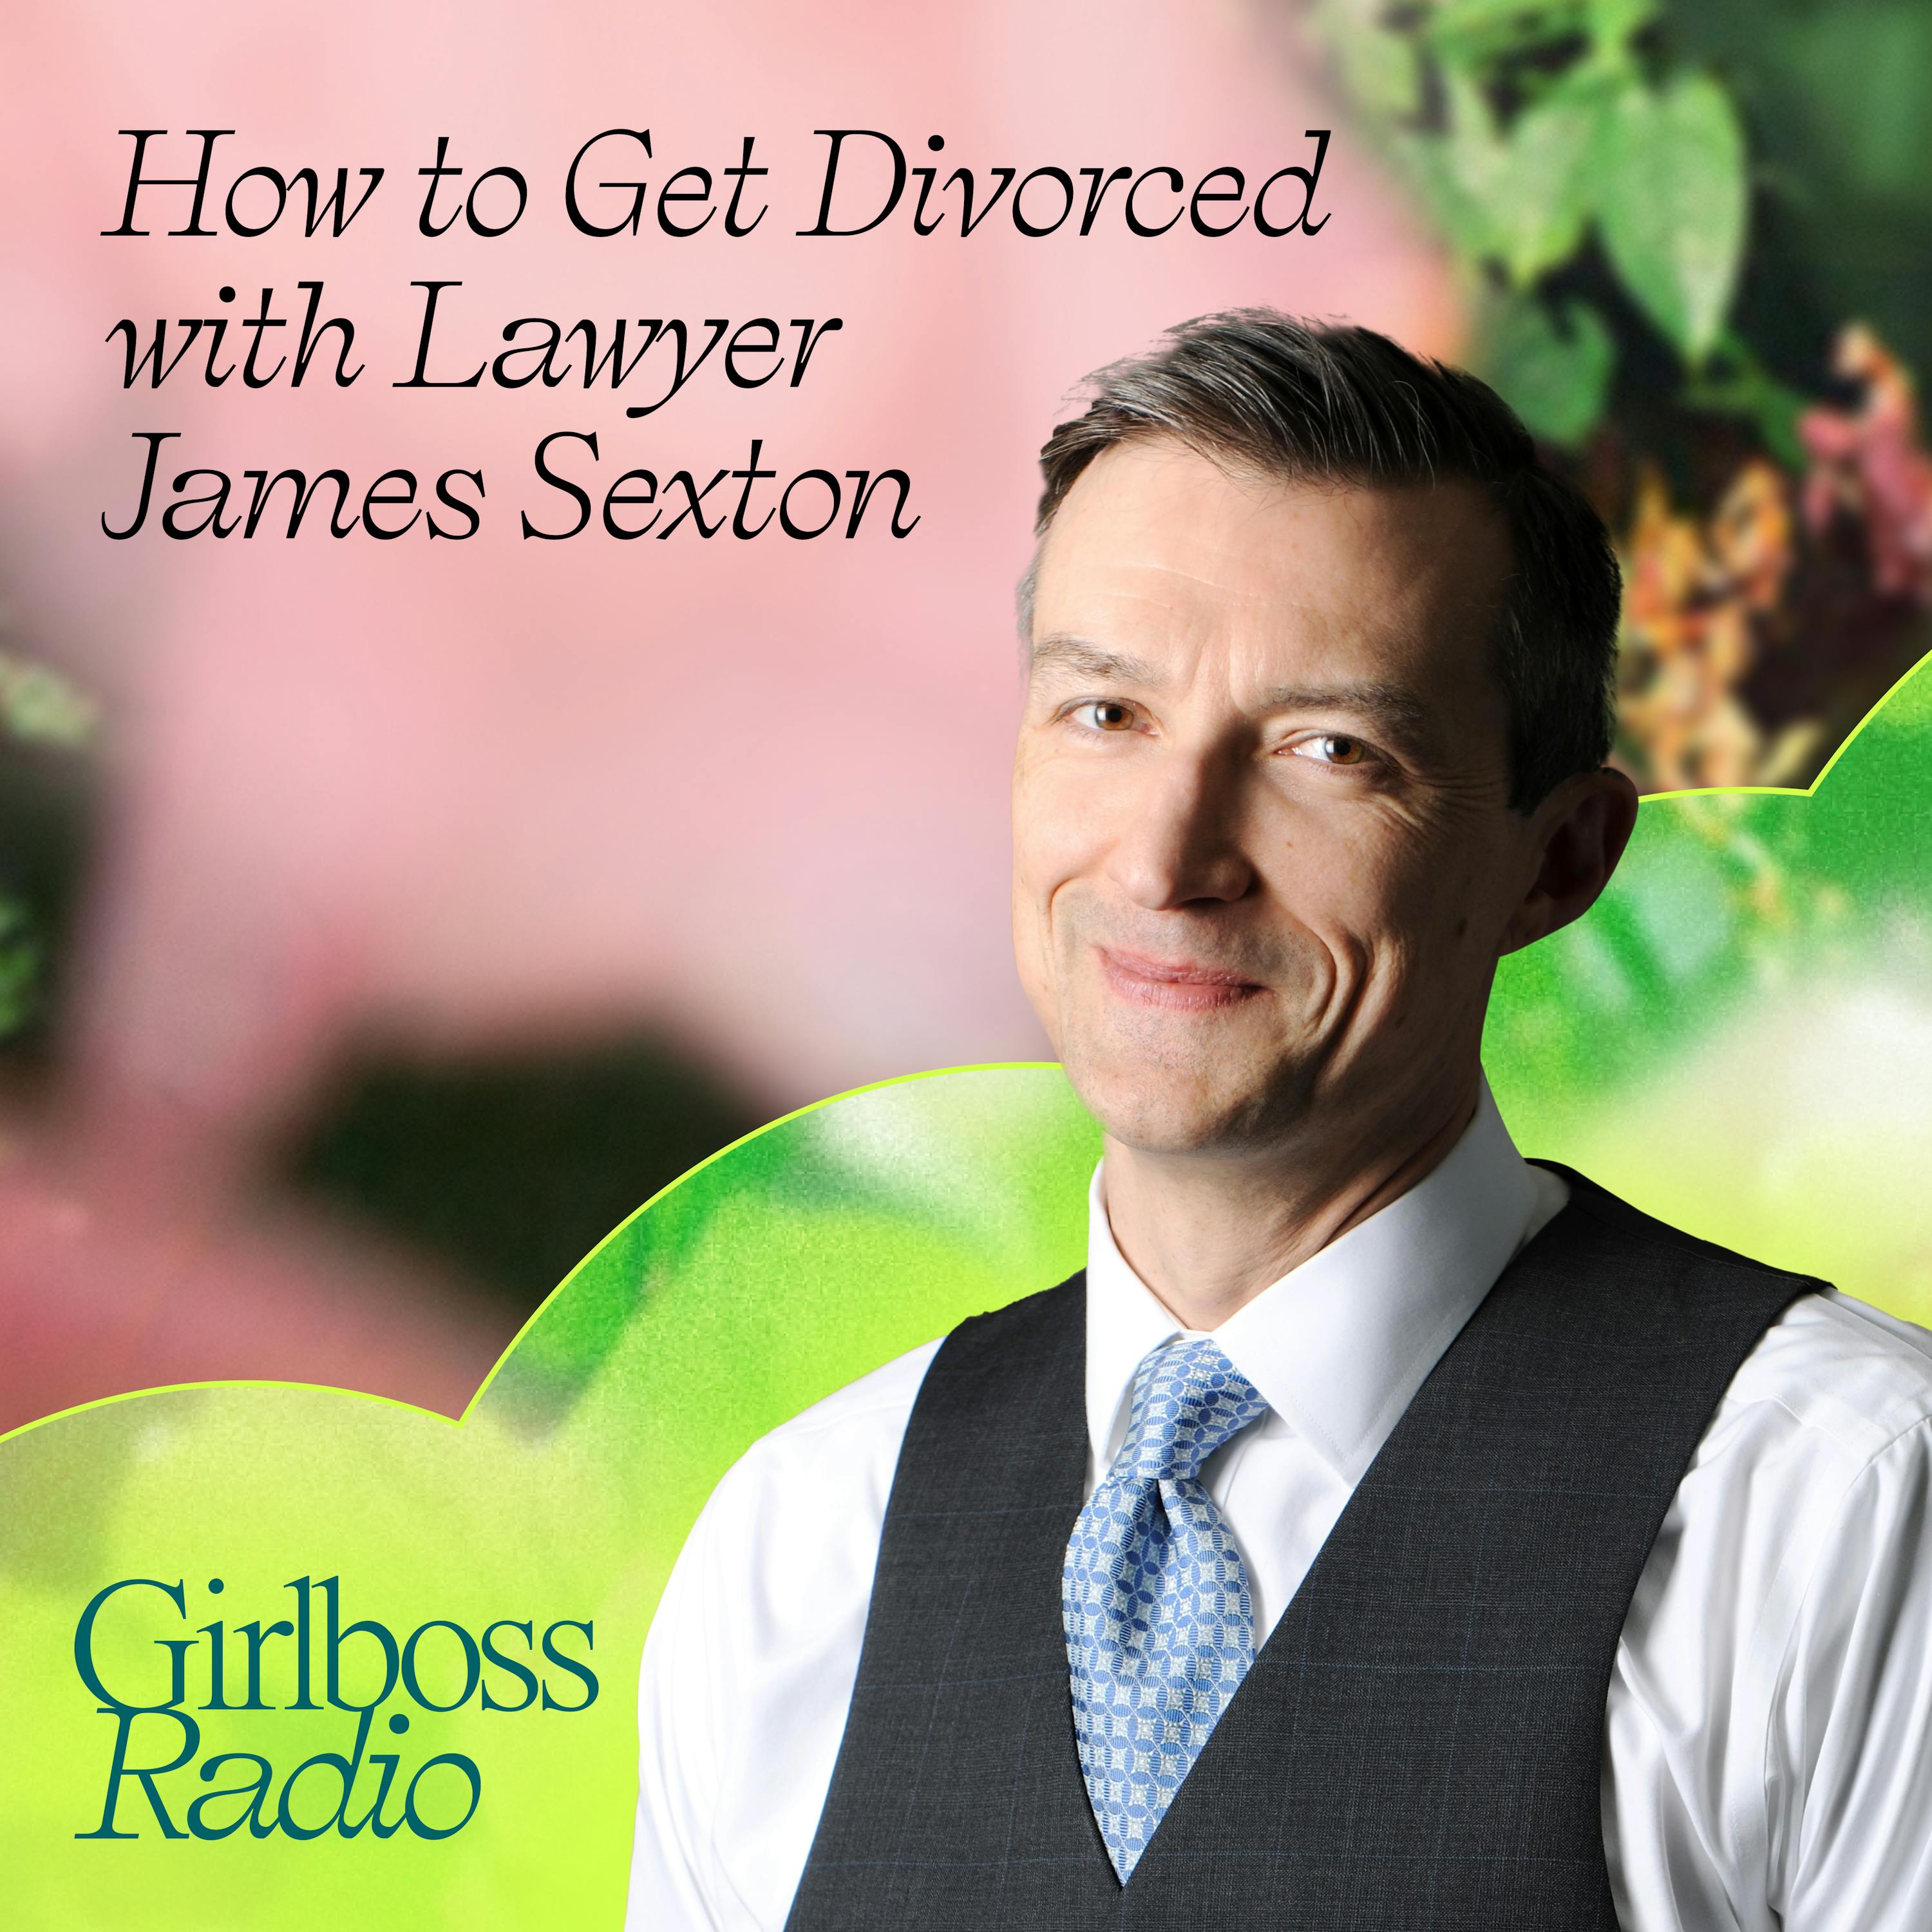 Getting Divorced with Lawyer James Sexton